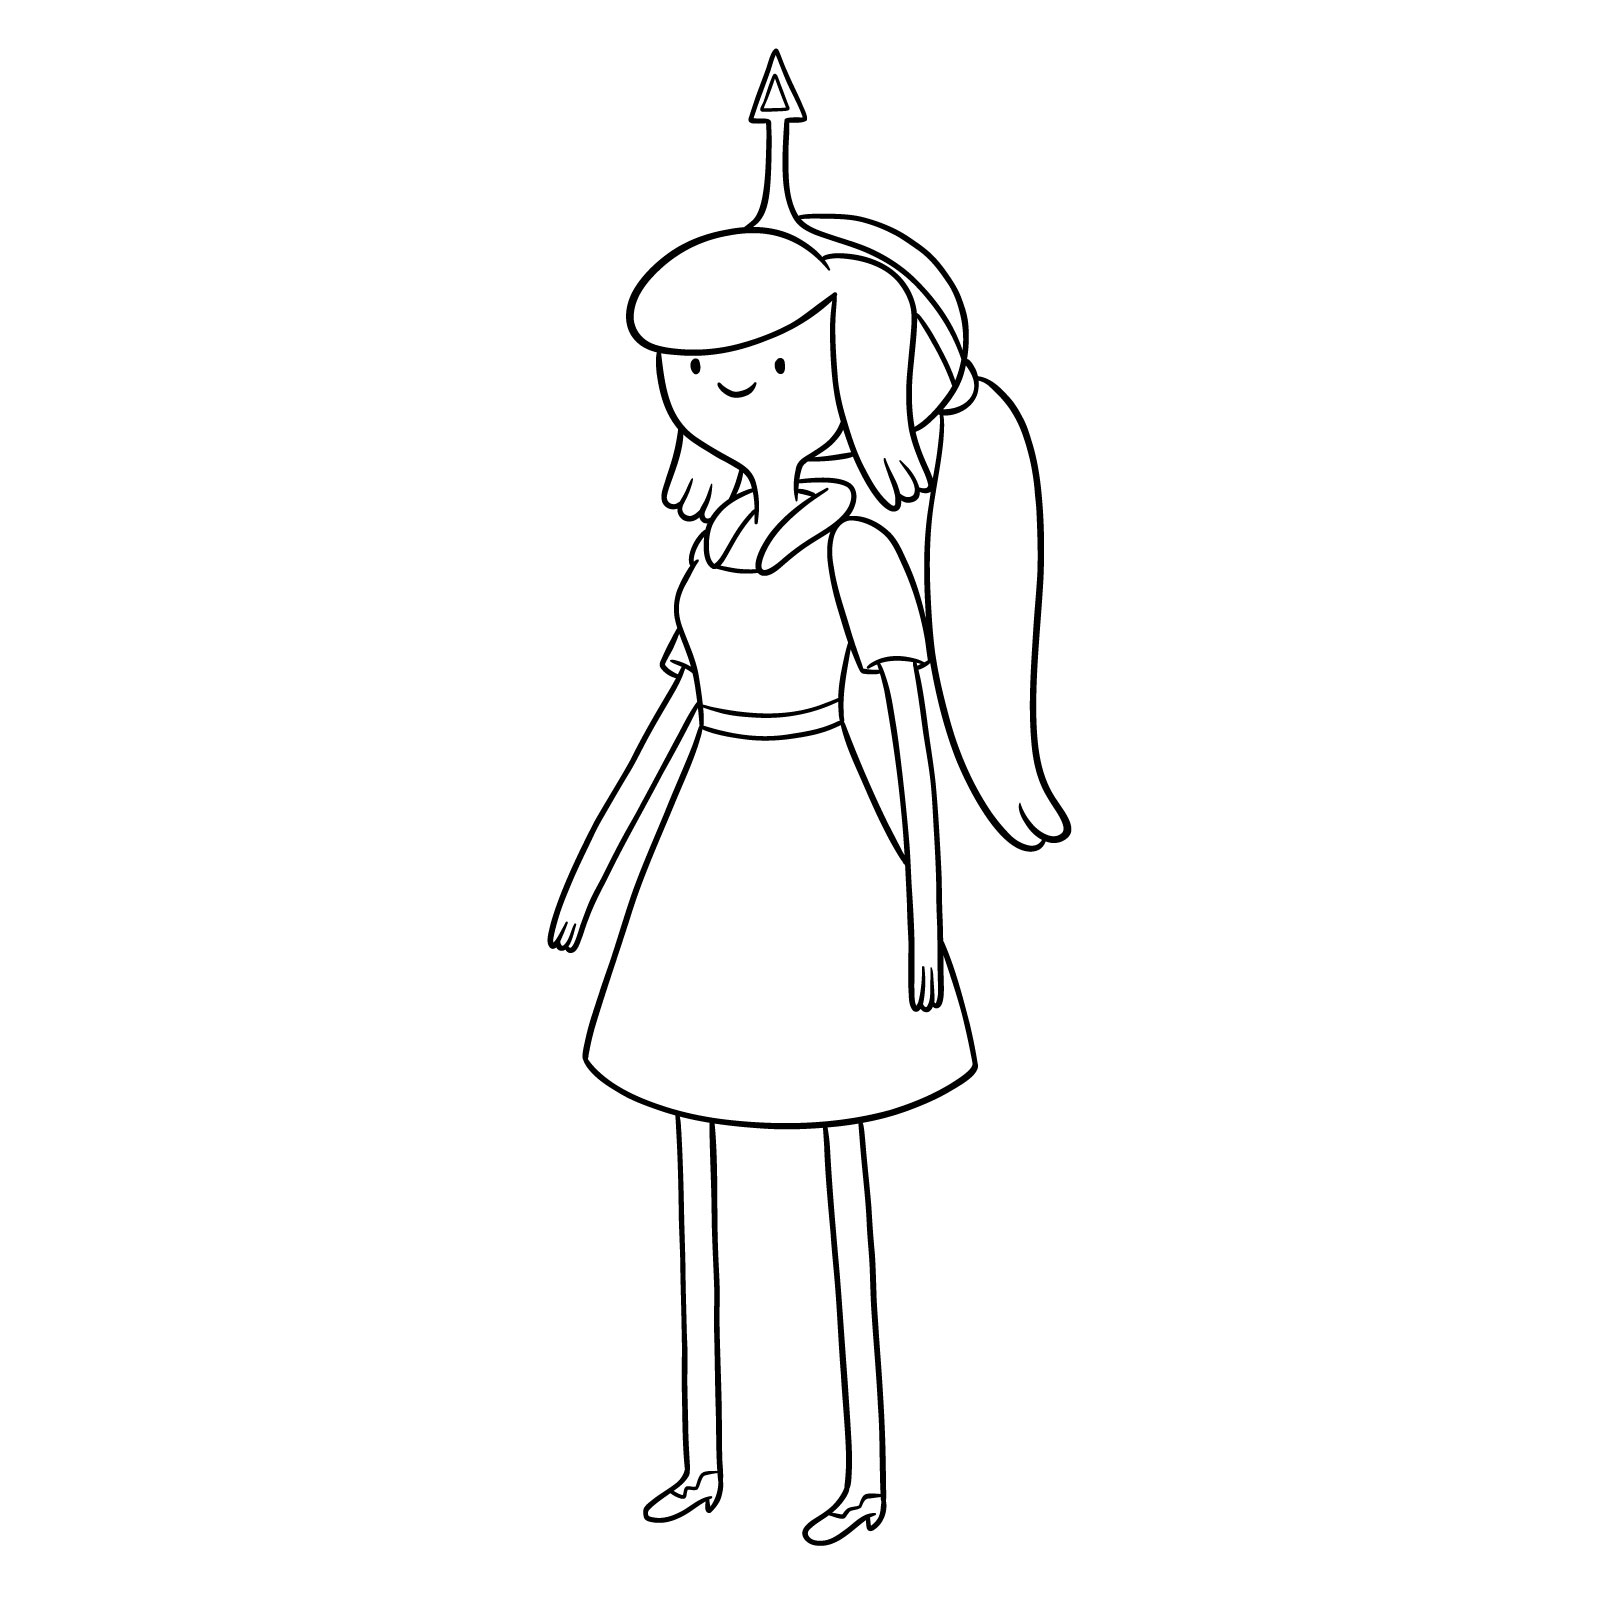 How to draw Princess Chewypaste from Adventure Time - final step